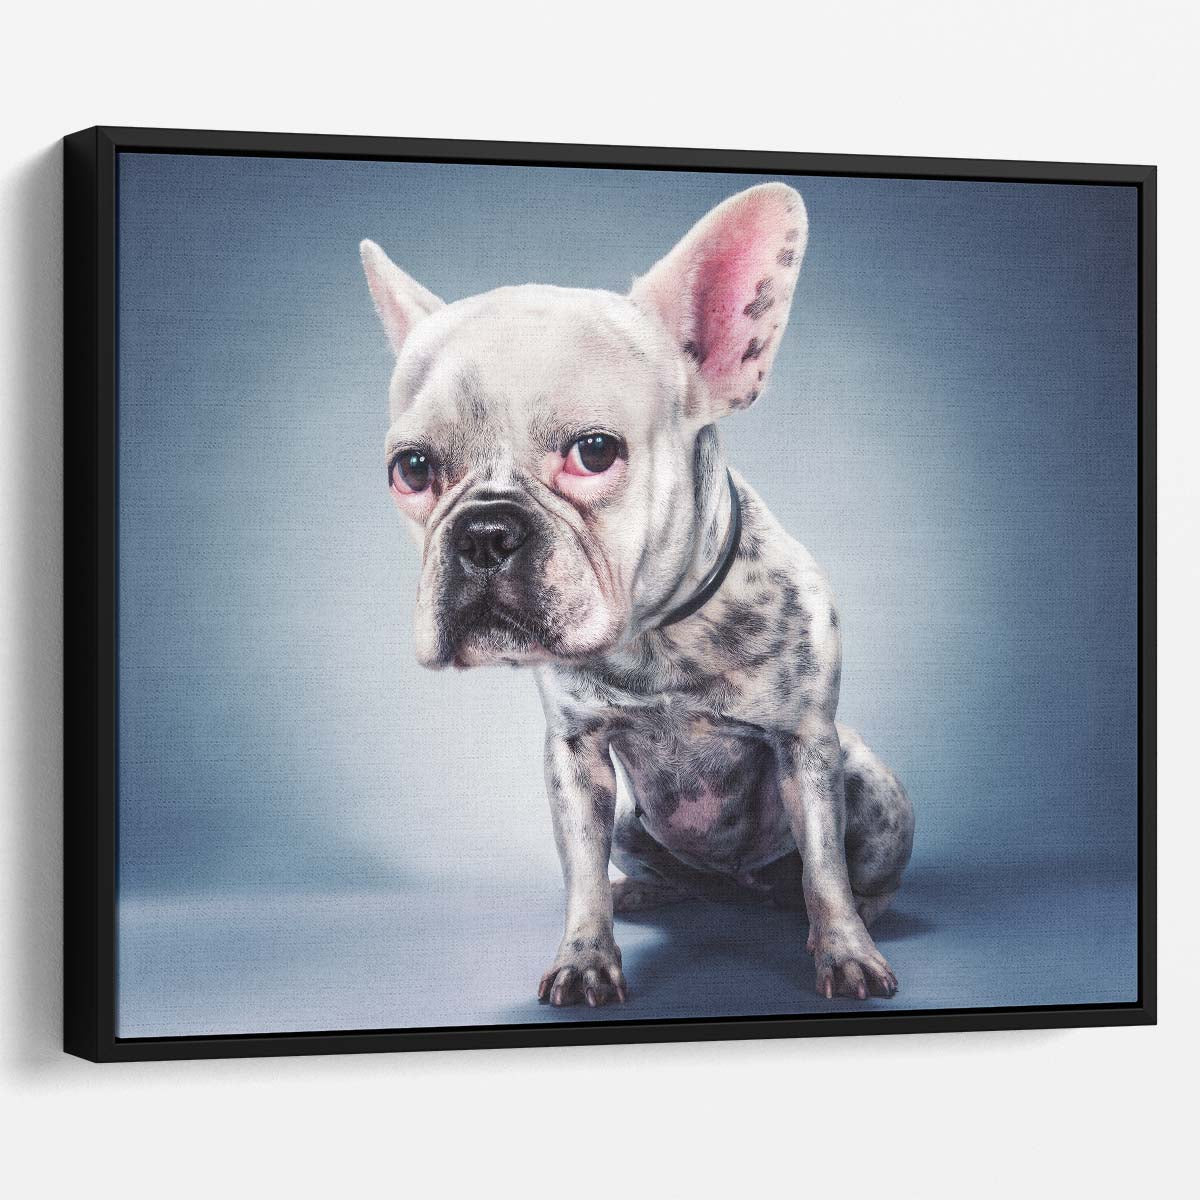 Creative Pink French Bulldog with Big Ears Wall Art by Luxuriance Designs. Made in USA.